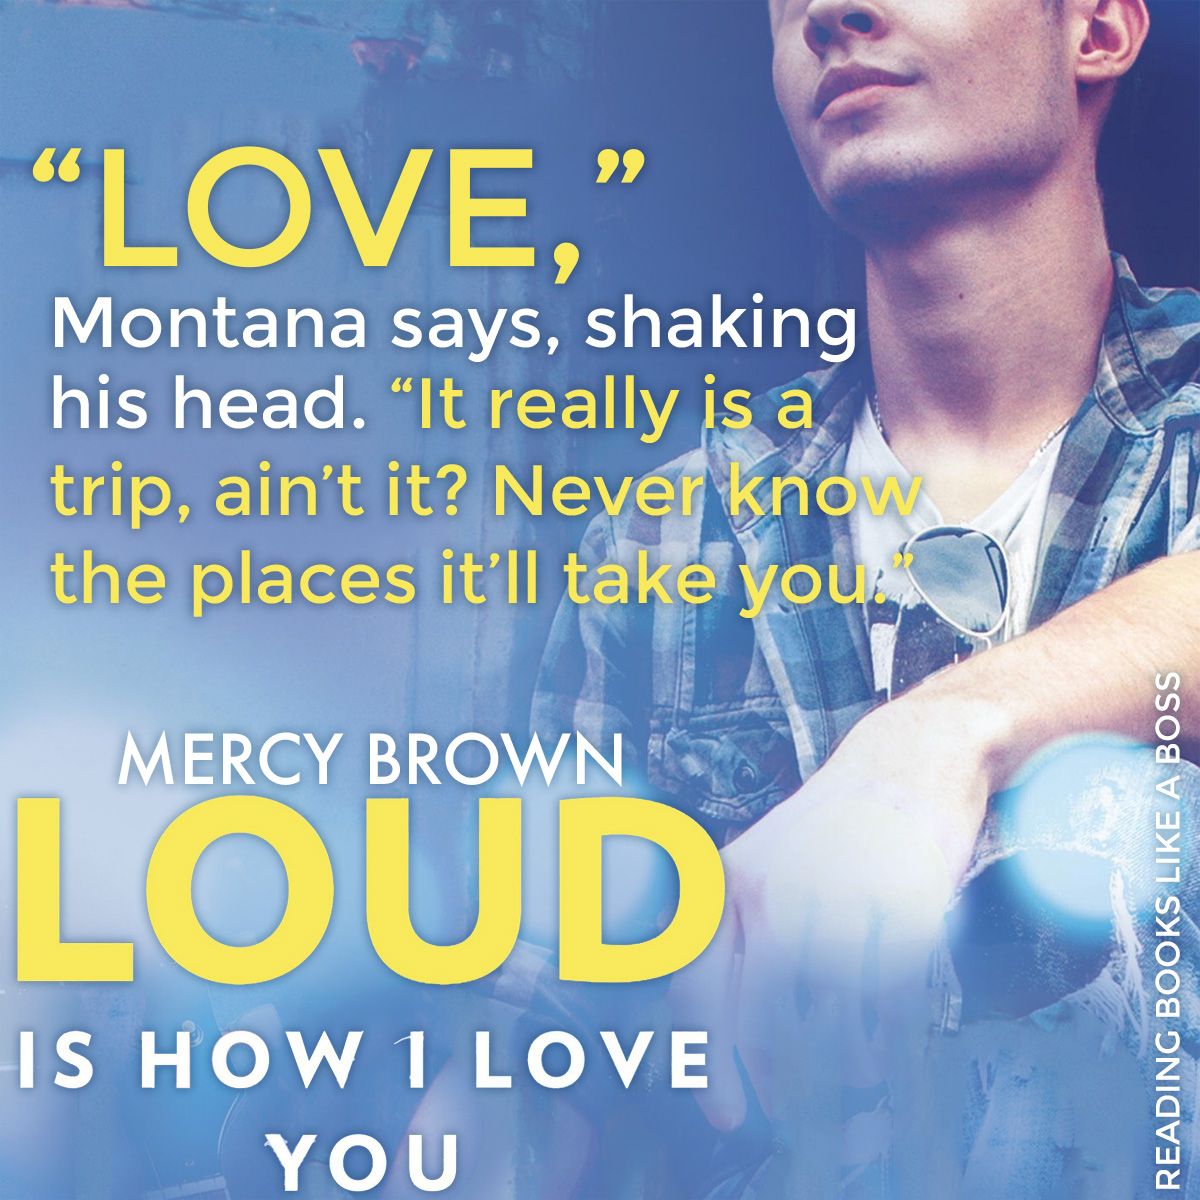 Loud is How I Love You by Mercy Brown